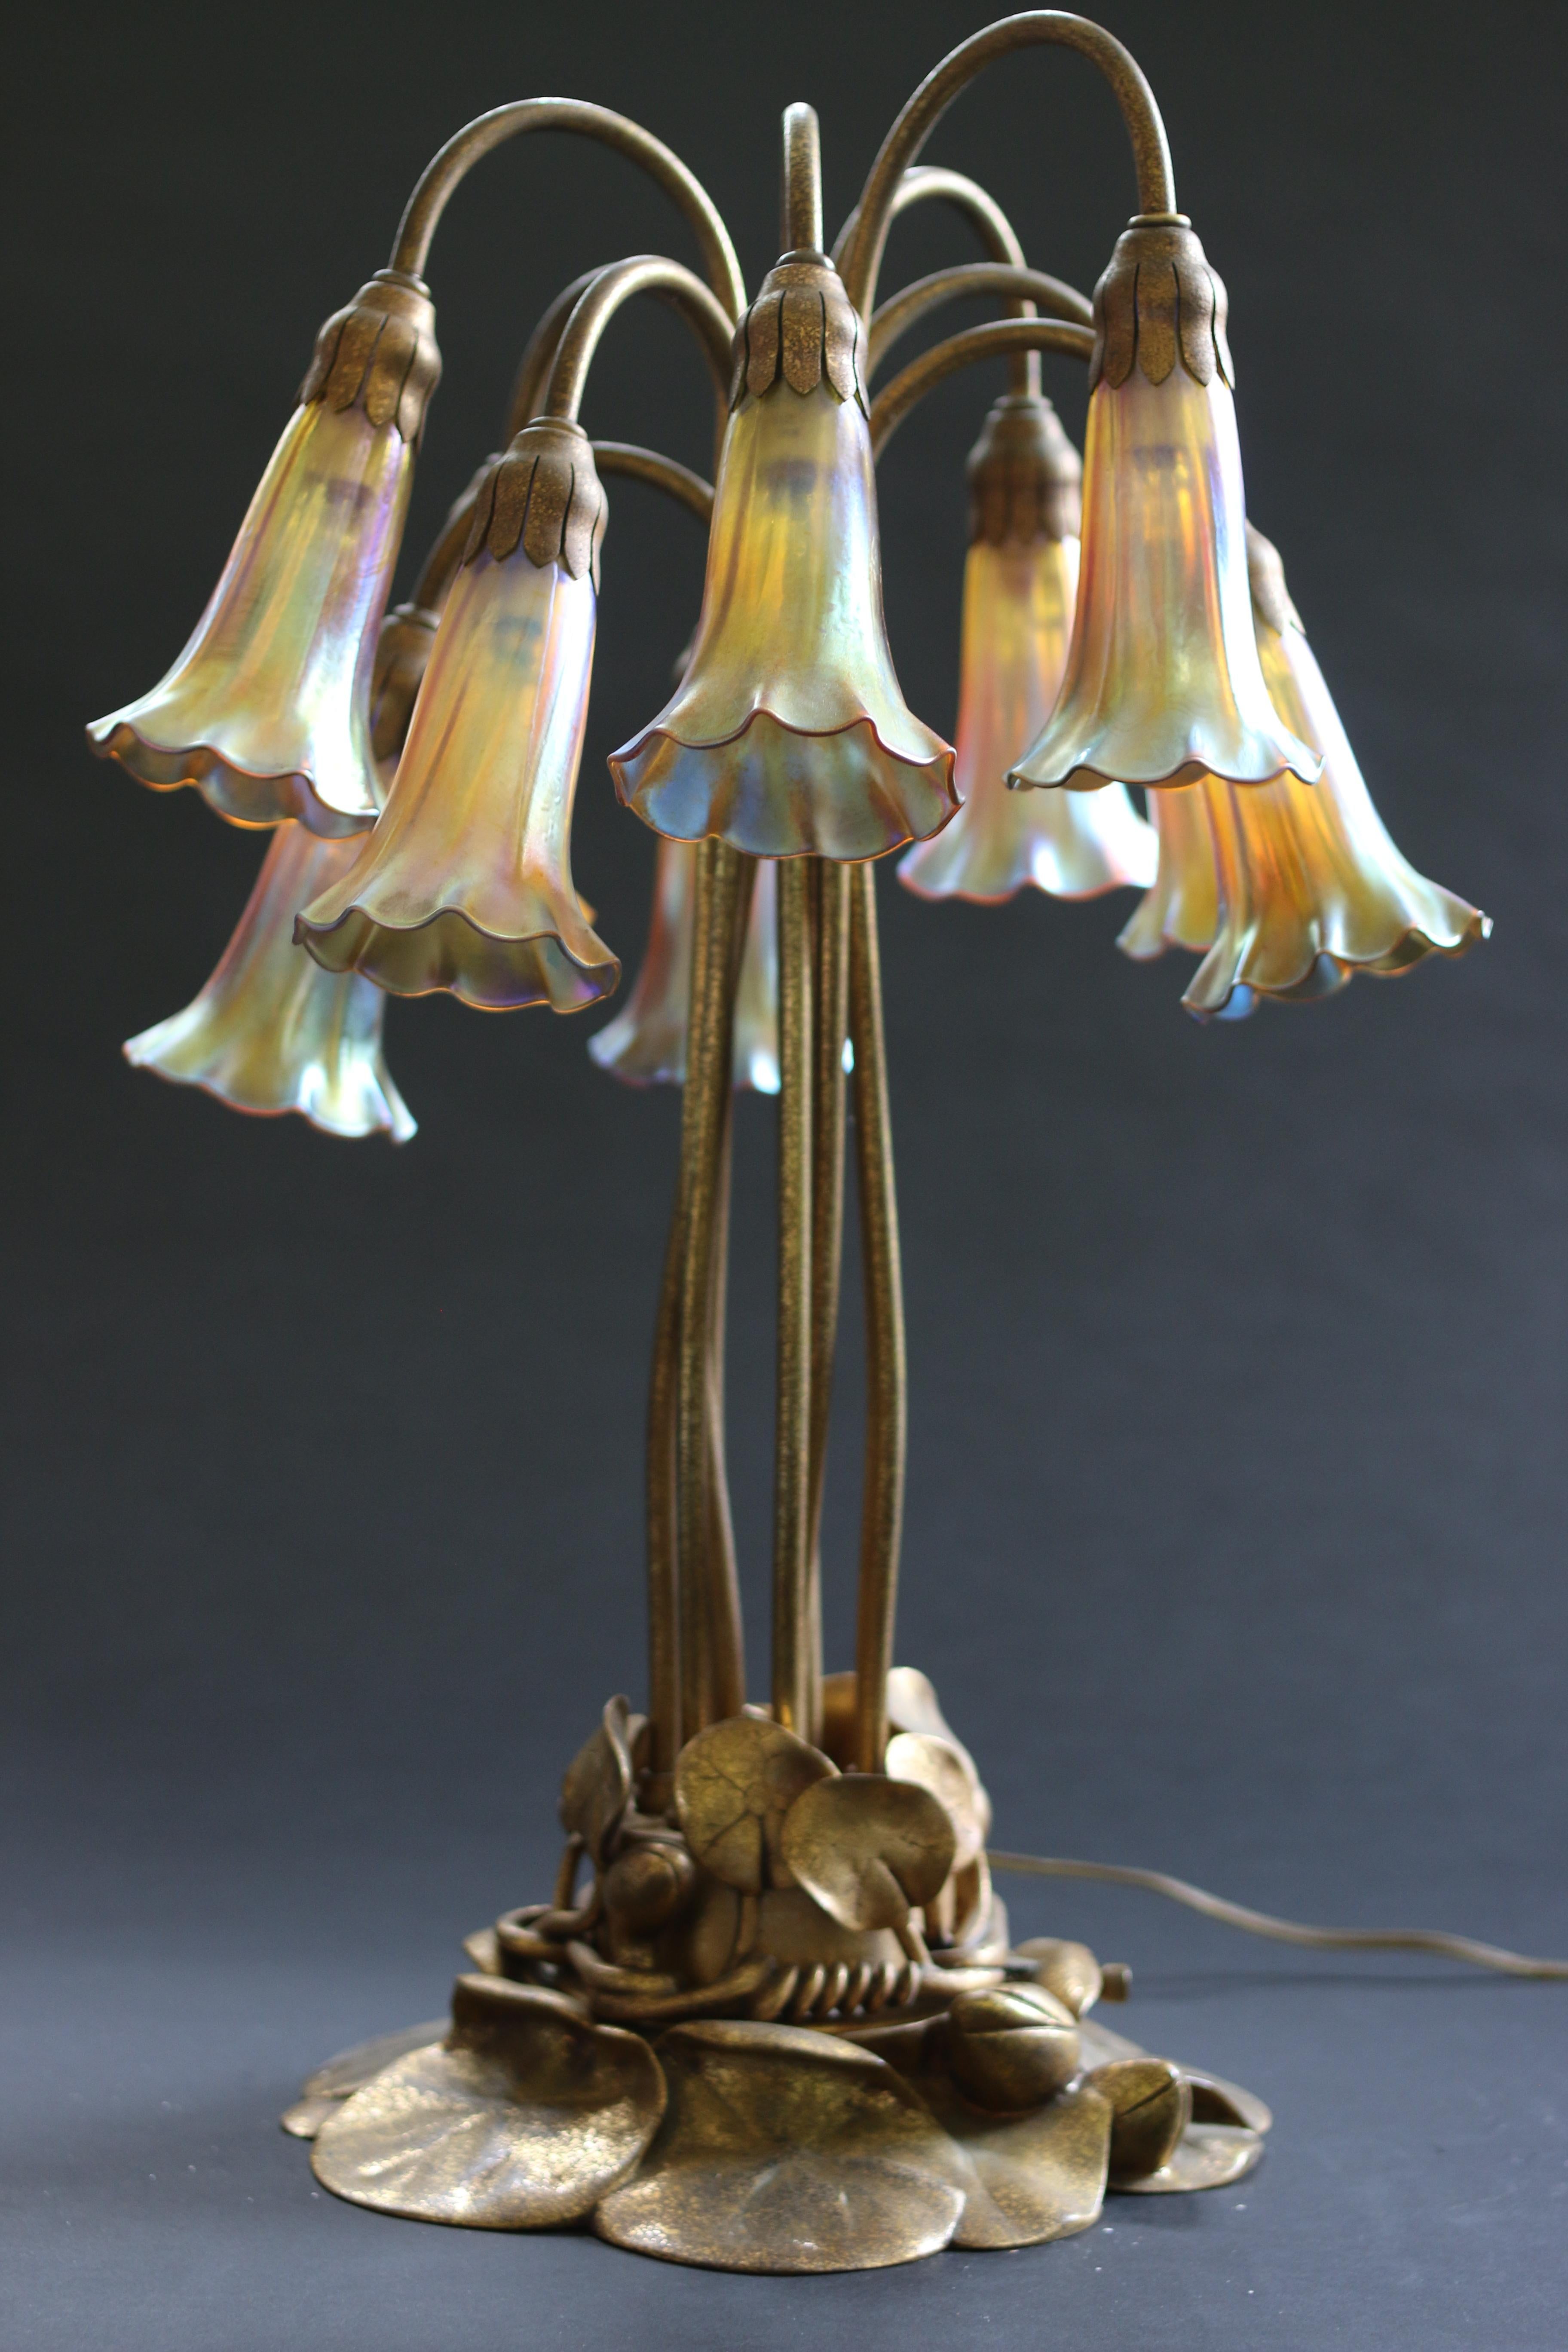 Burnished Tiffany Studios Ten-Light Lily Lamp For Sale